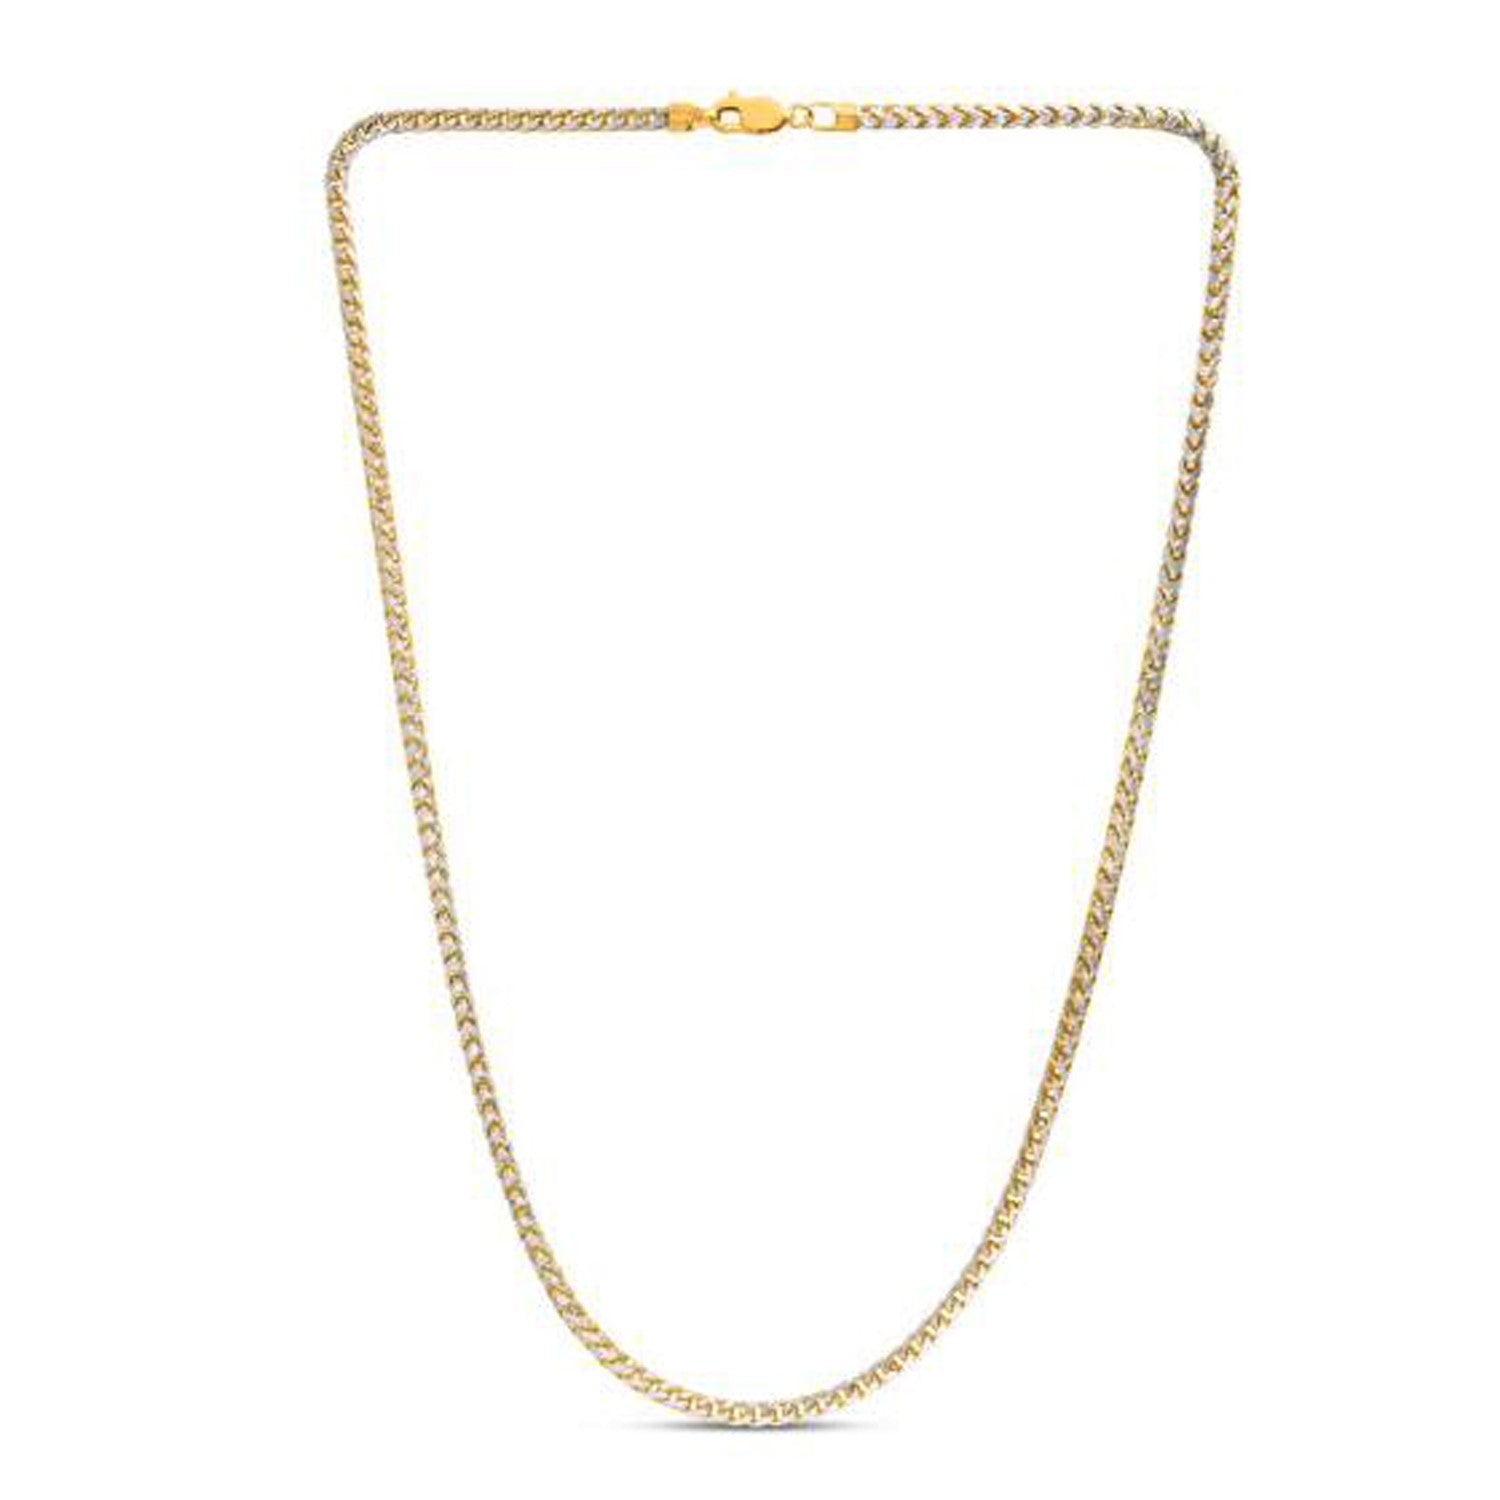 3 1Mm 14K Yellow Gold Round Pave Franco Chain 89045-3